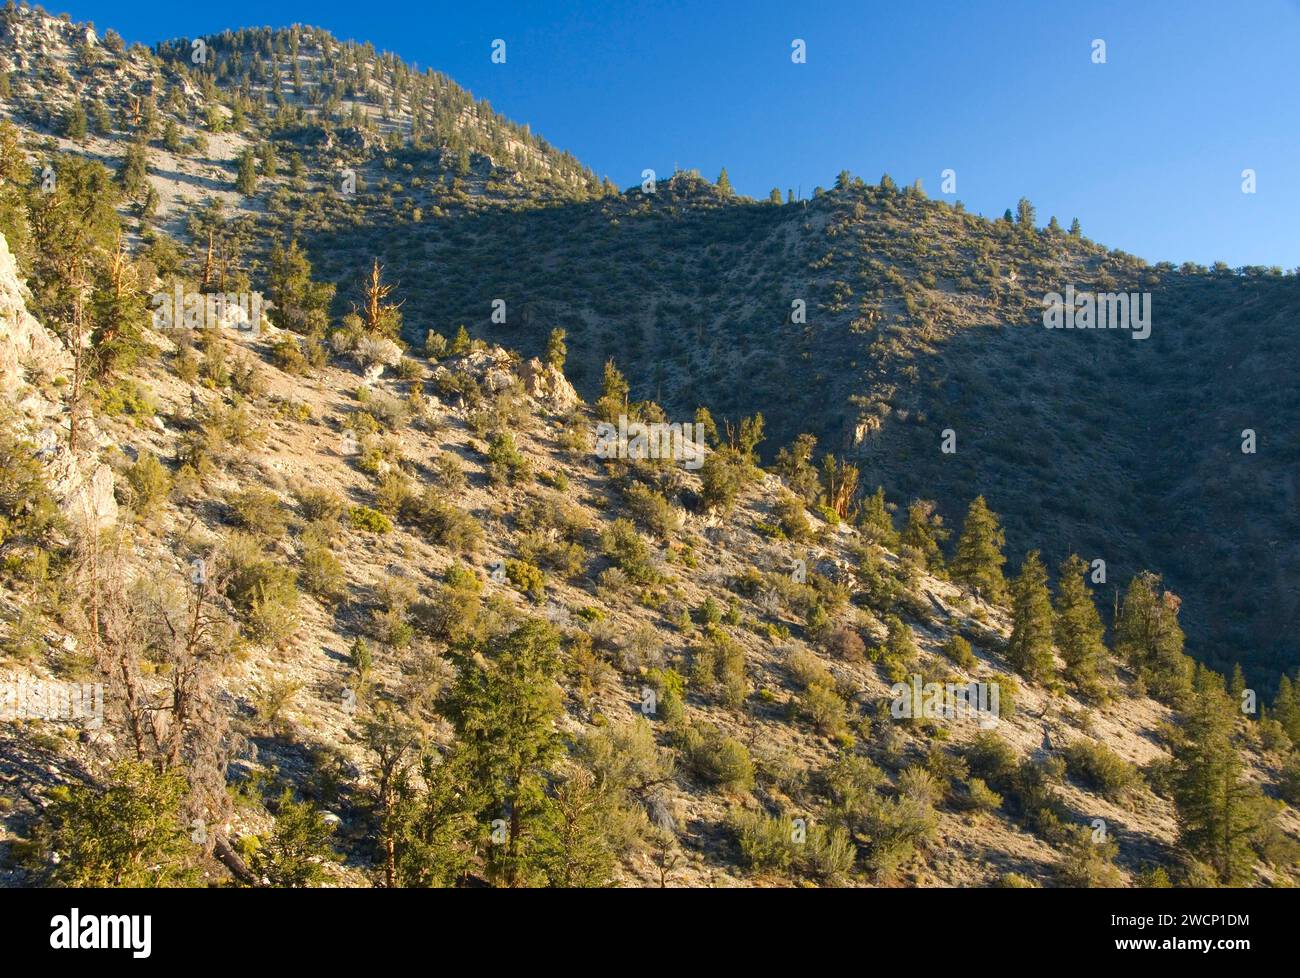 Schulman Grove along Methuselah Walk National Recreation Trail, Ancient Bristlecone Pine Forest, Inyo National Forest, California Stock Photo